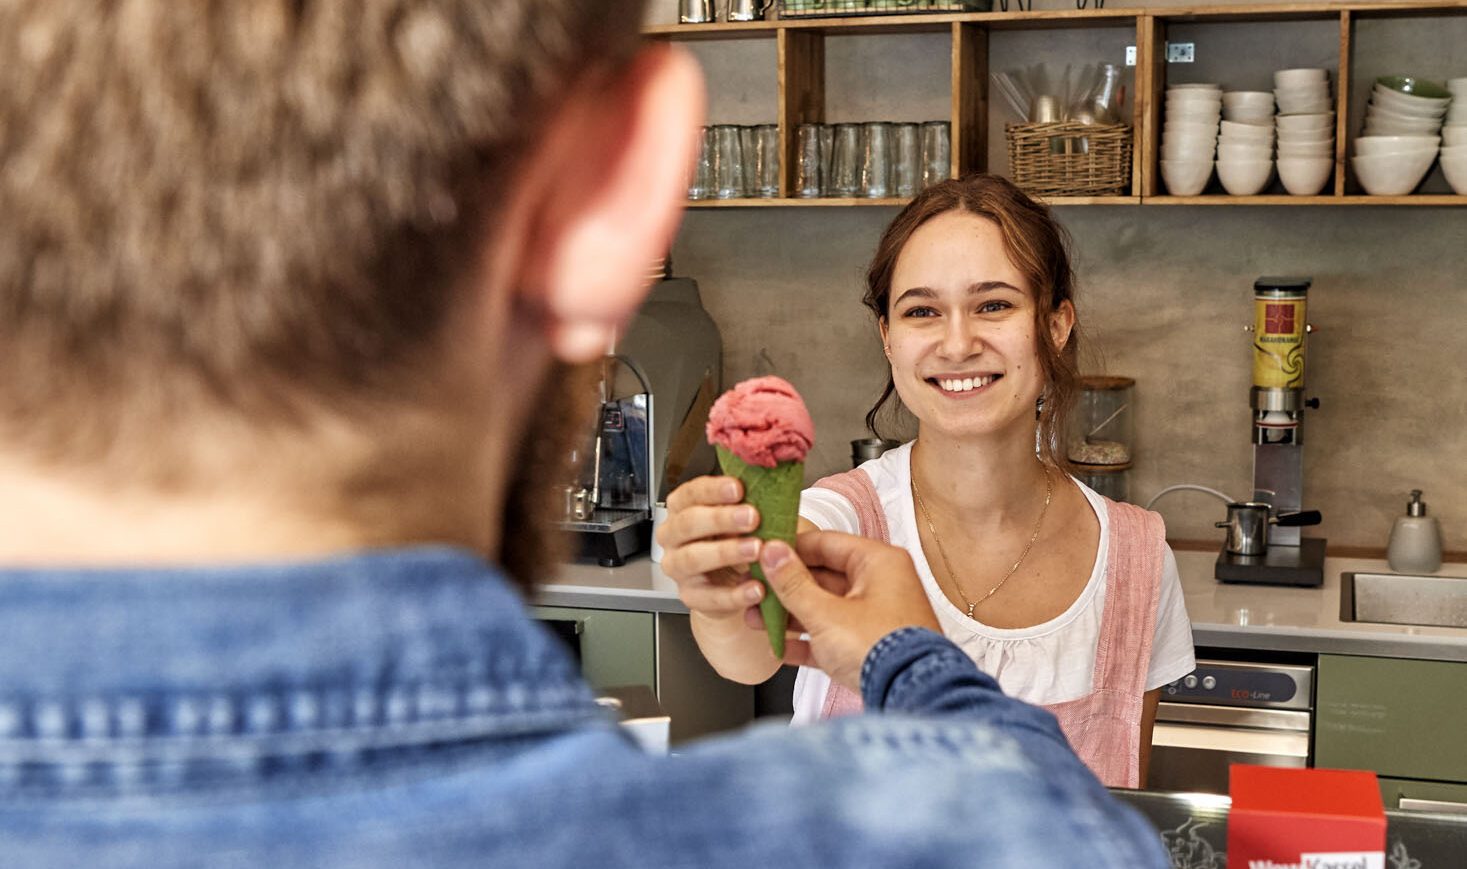 Handmade ice cream creations and a friendly smile: Café Eislust in the heart of the city © Kassel Marketing GmbH/Florian Trykowski